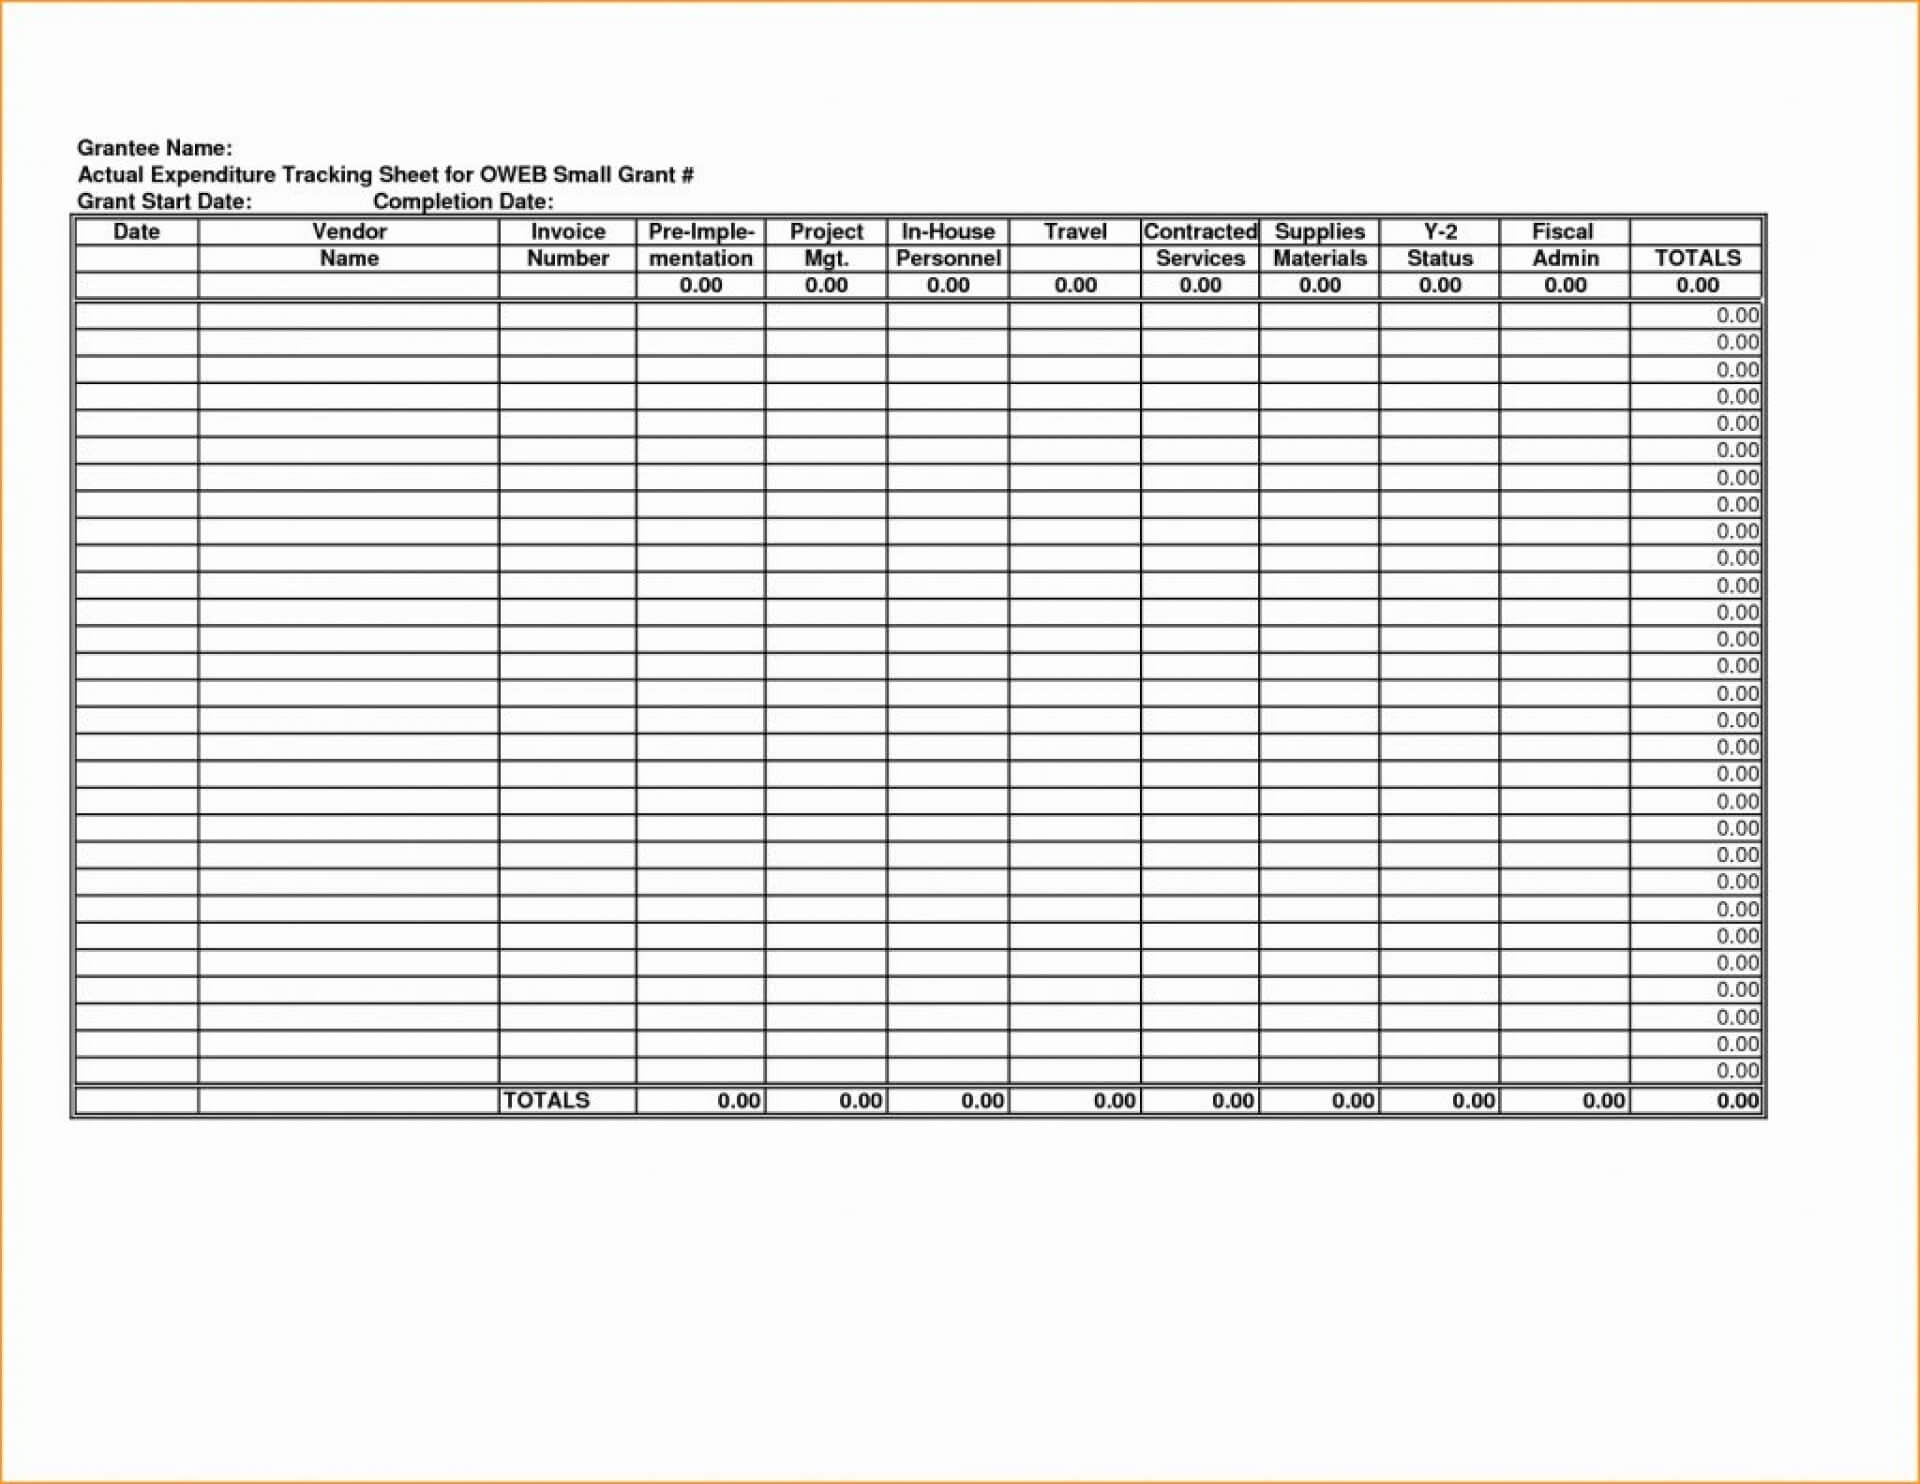 029 Template Ideas Expense Report Excel Small Business With Regard To Expense Report Spreadsheet Template Excel